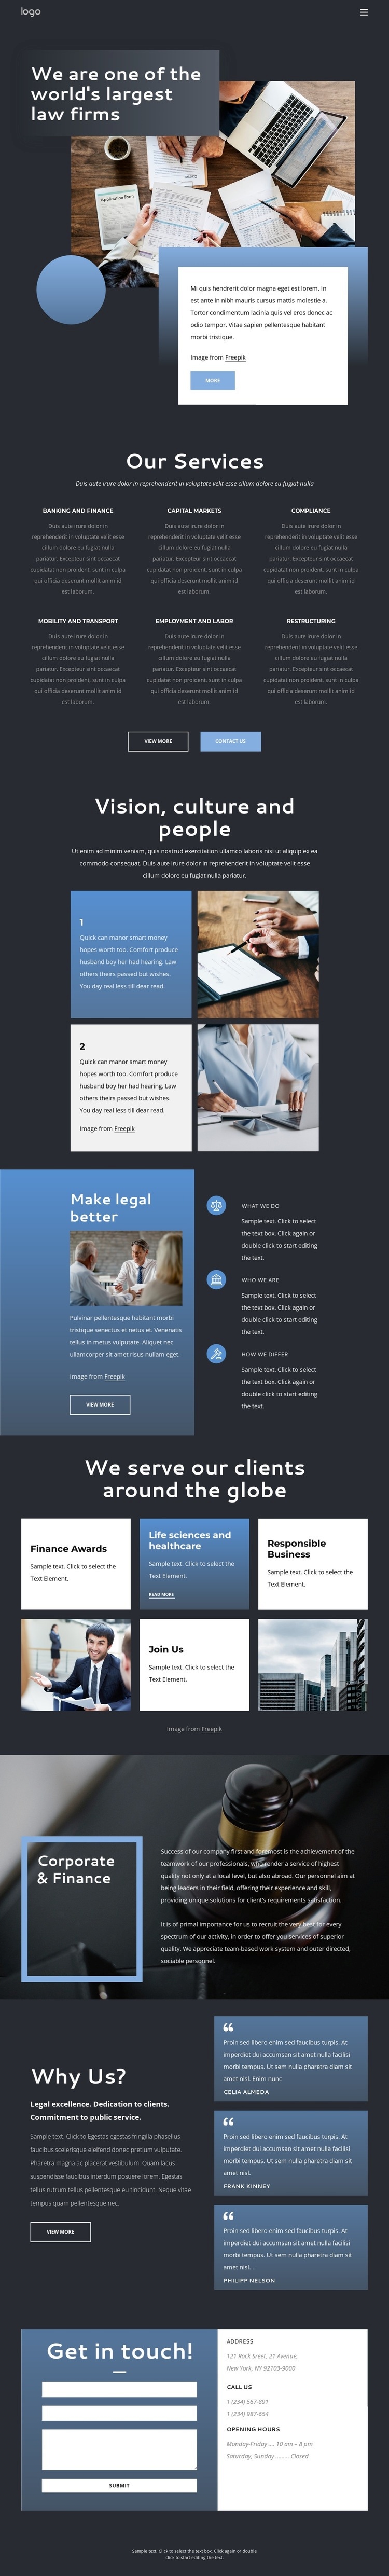 We are an elite law firm Wix Template Alternative